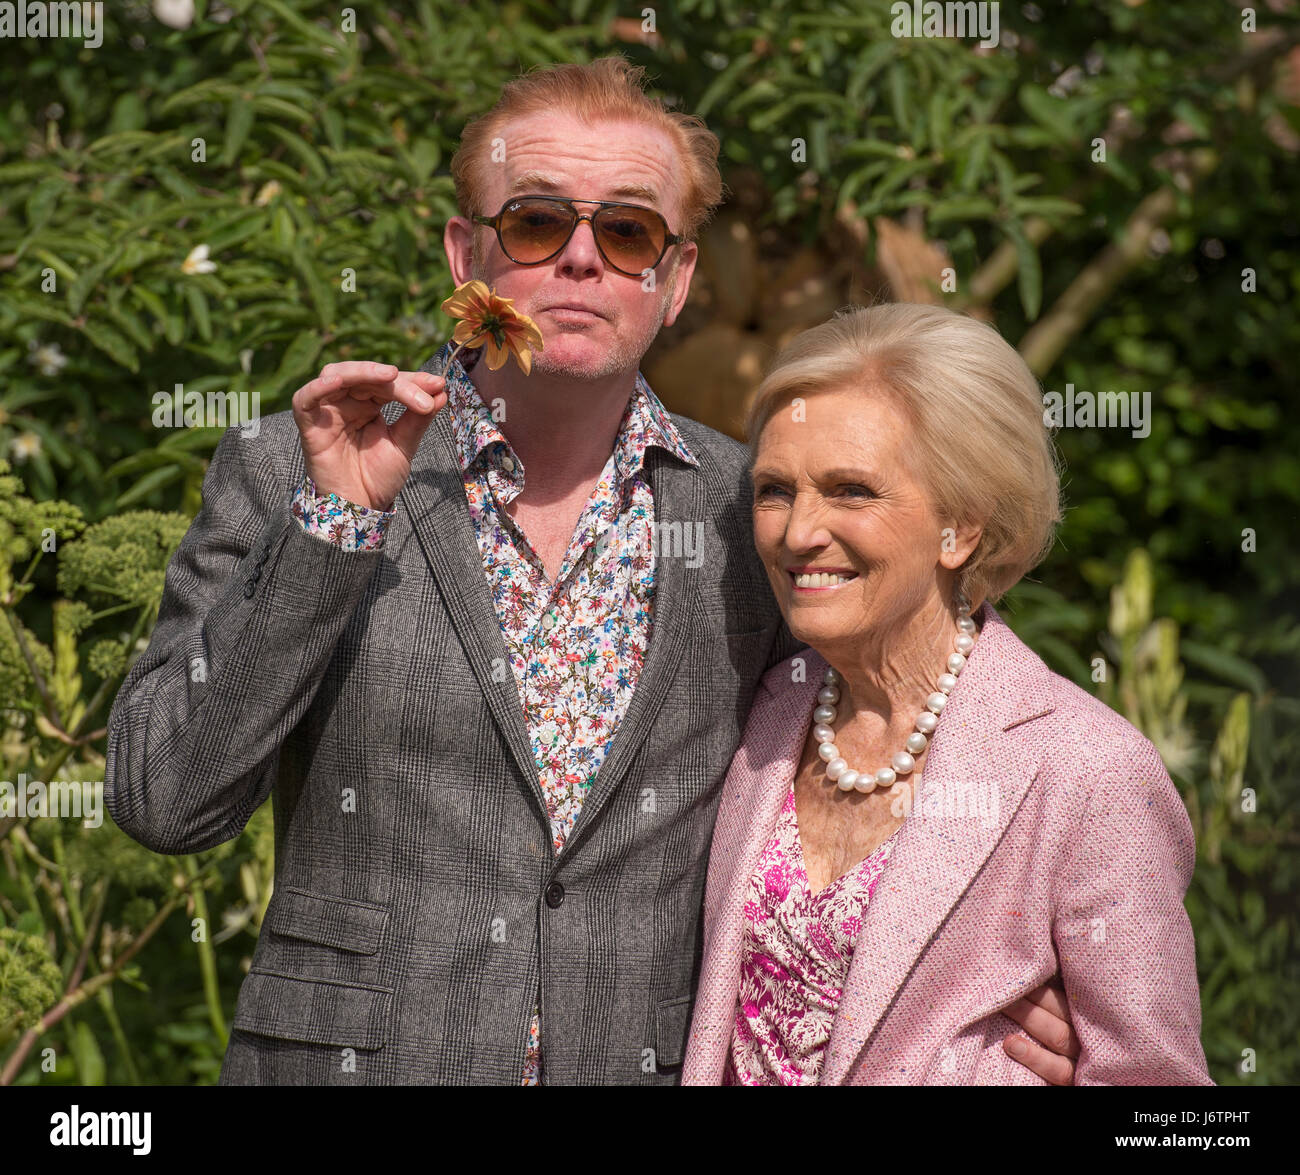 The Royal Hospital Chelsea, London, UK. 22nd May, 2017. The annual pinnacle of the horticultural calendar, the RHS Chelsea Flower Show, preview day with celebrities visiting. Photo: TV presenters Chris Evans and Mary Berry on the BBC2 Chris Evans Taste Garden celebrate the tastiest plants grown in UK gardens. Credit: Malcolm Park editorial/Alamy Live News. Stock Photo